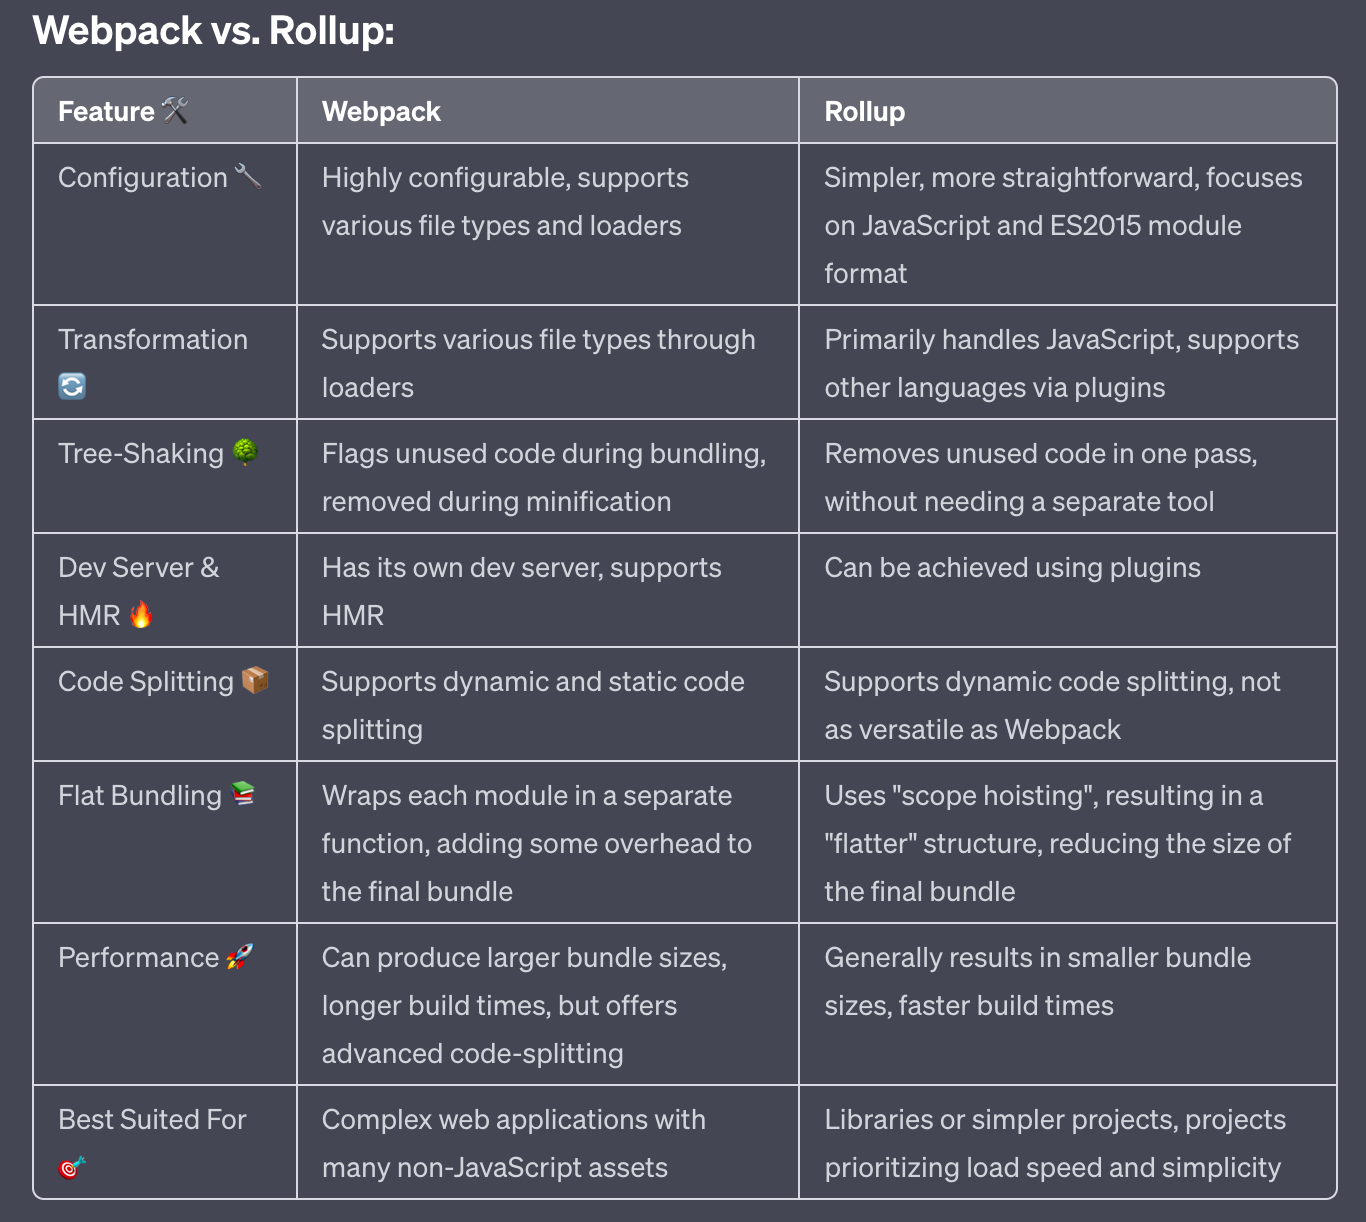 Summary table of Webpack vs. Rollup, comparing features.